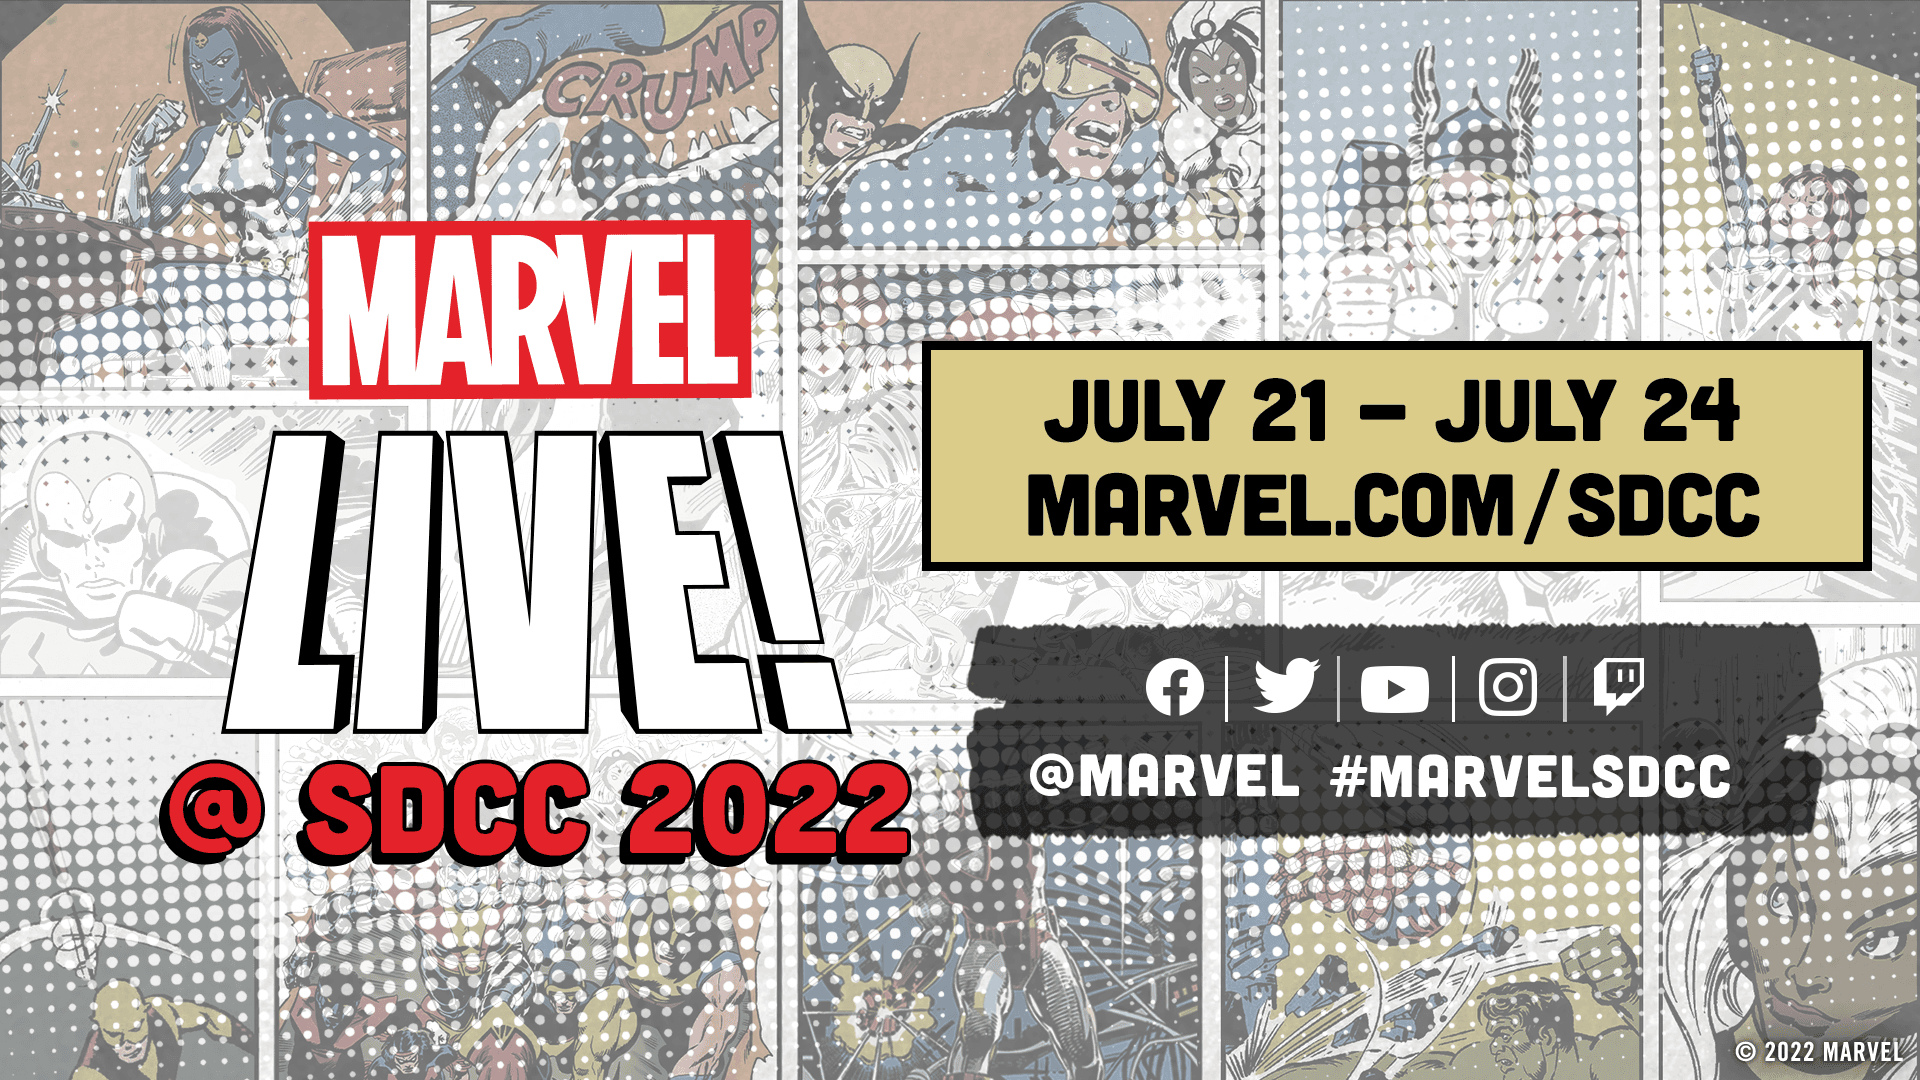 Marvel at SDCC San Diego Comic-Con 2022